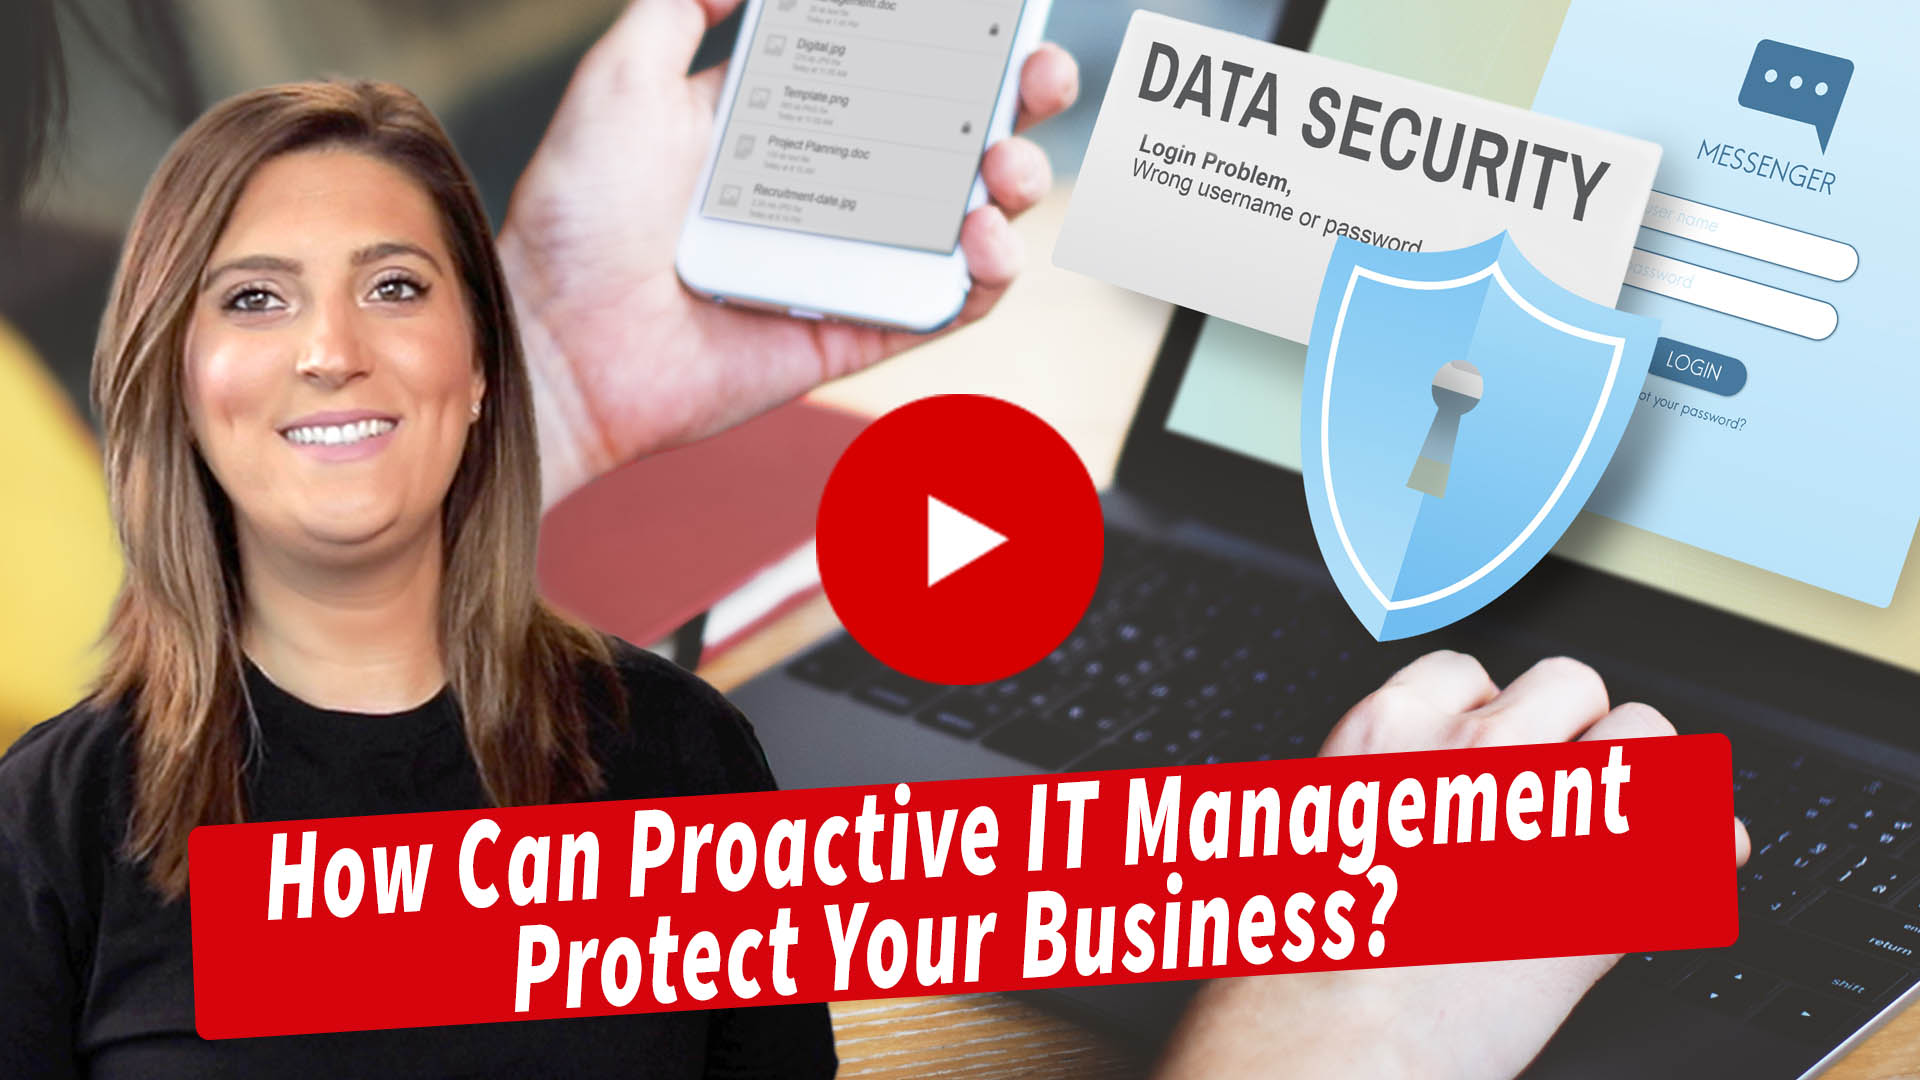 How Can Proactive IT Management Protect Your Business?